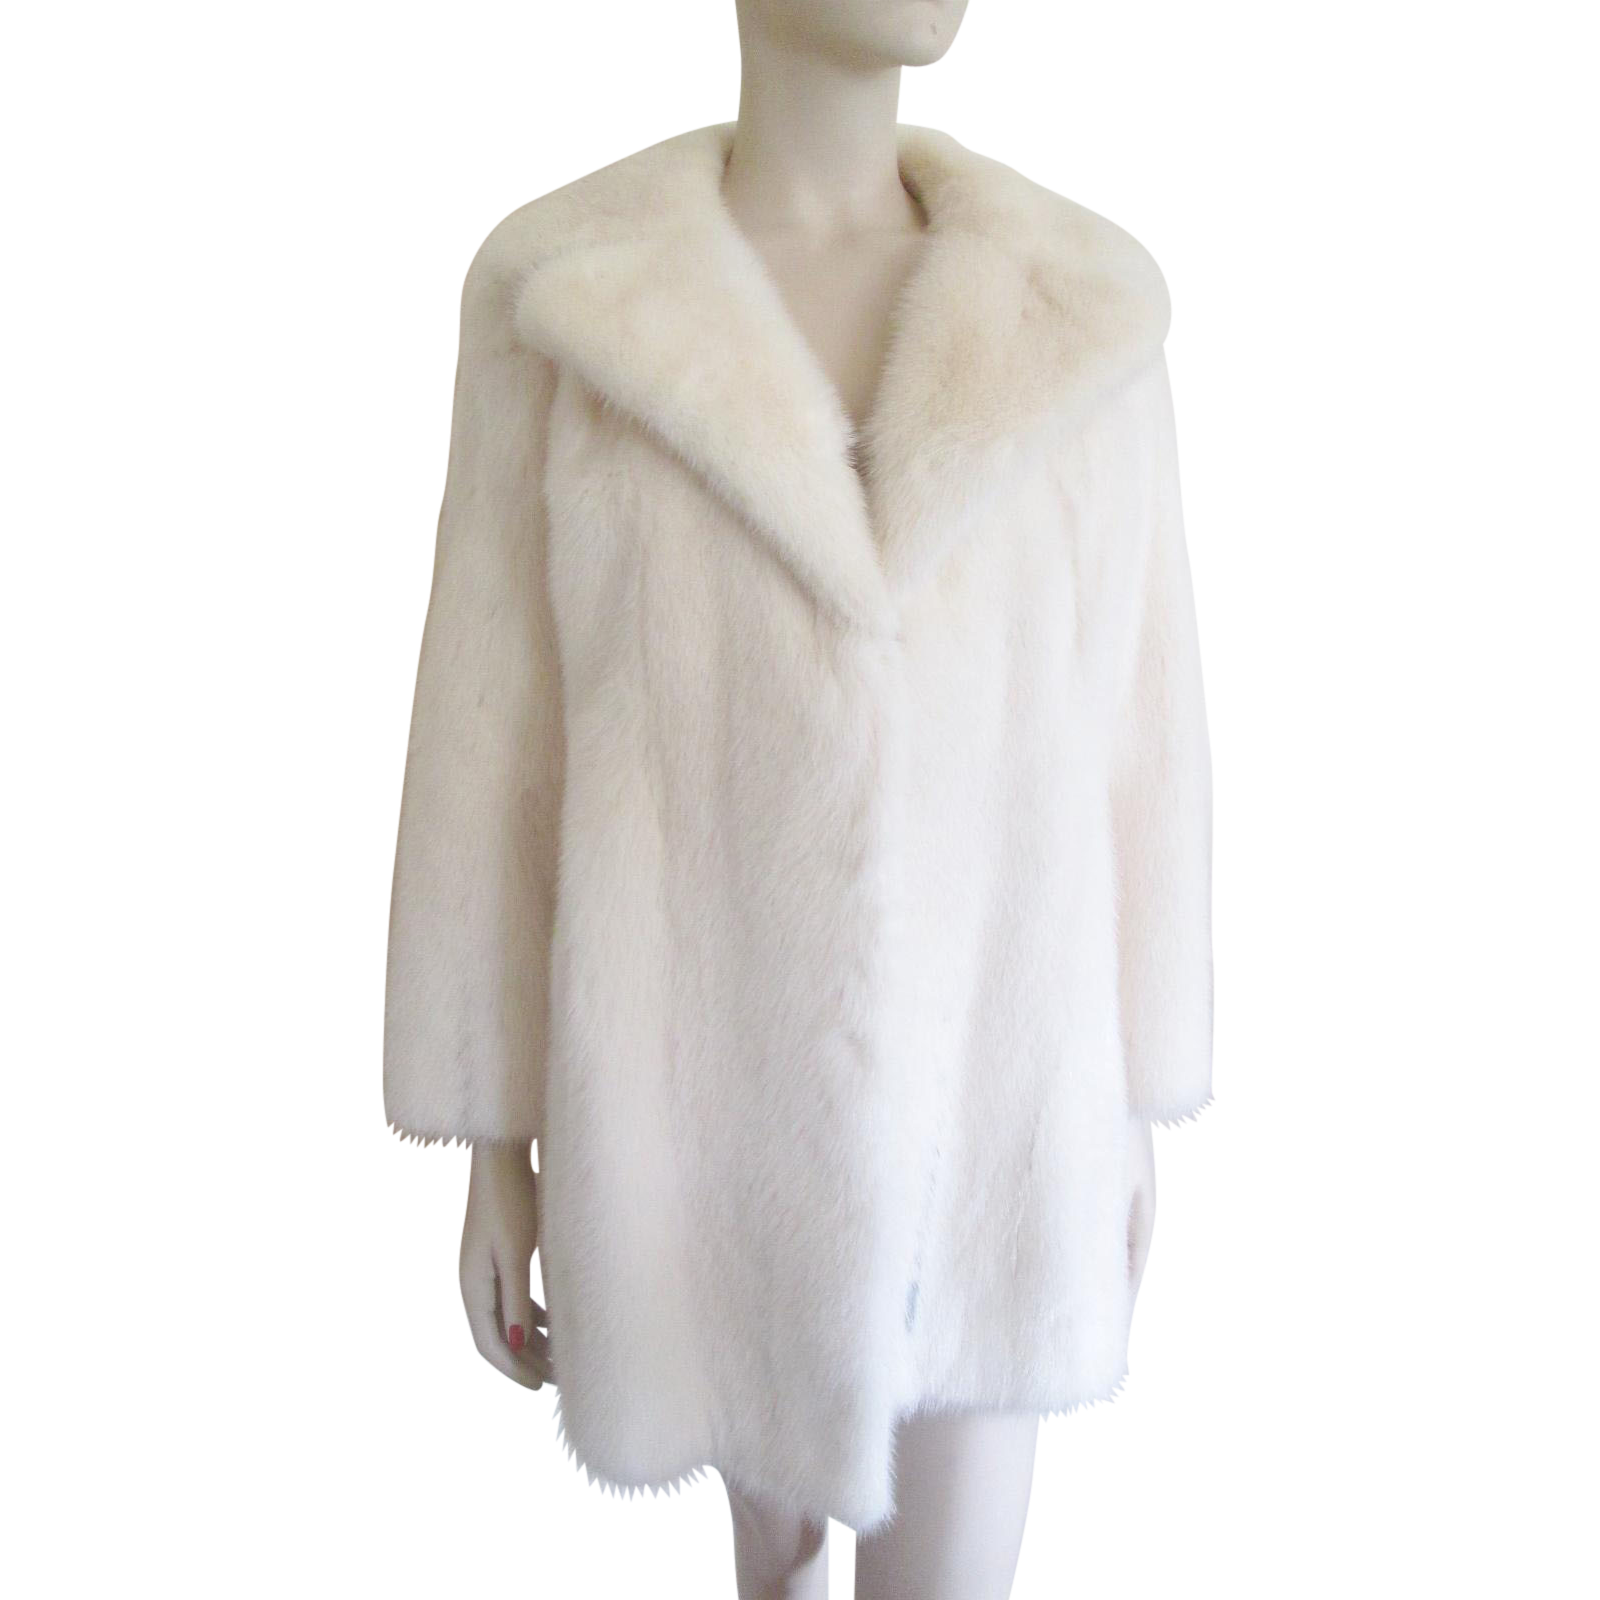 Rare White Ermine Fur Coat Stole Vintage 1950s Pre Ban Estate Winter From Rubylane Sold On Ruby Lane